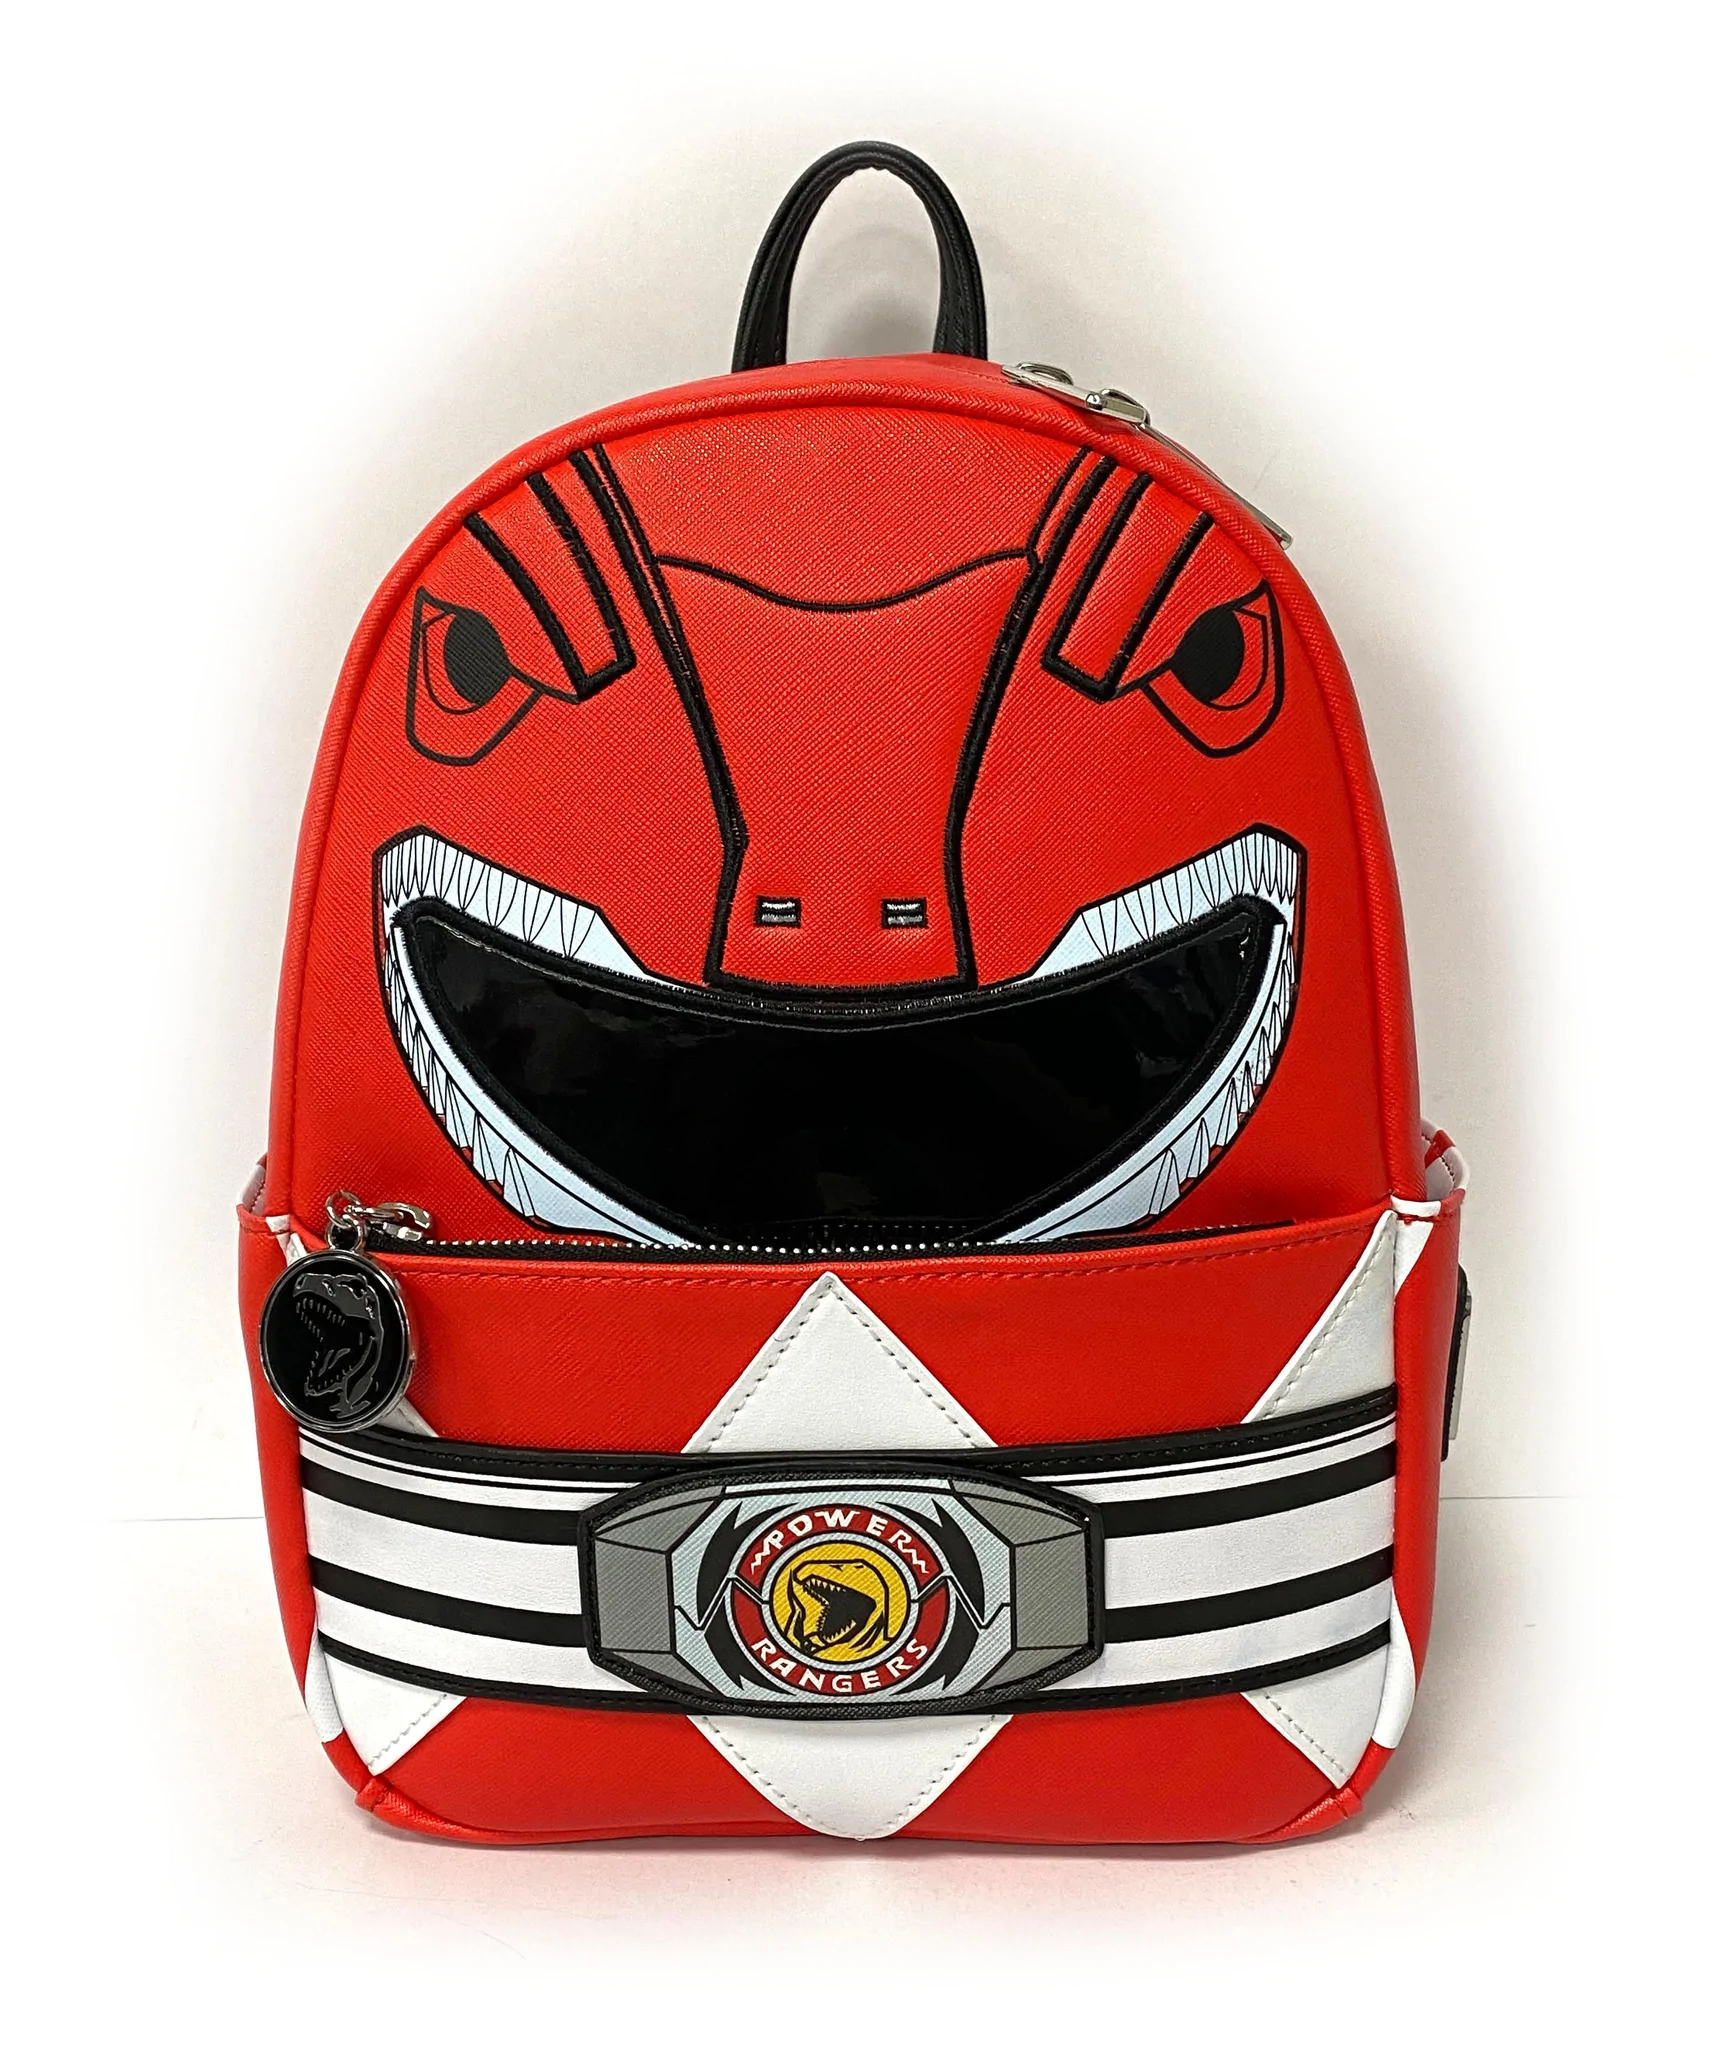 Loungefly MMPR Red Ranger Mini Backpack Announced - Morphin\' Legacy